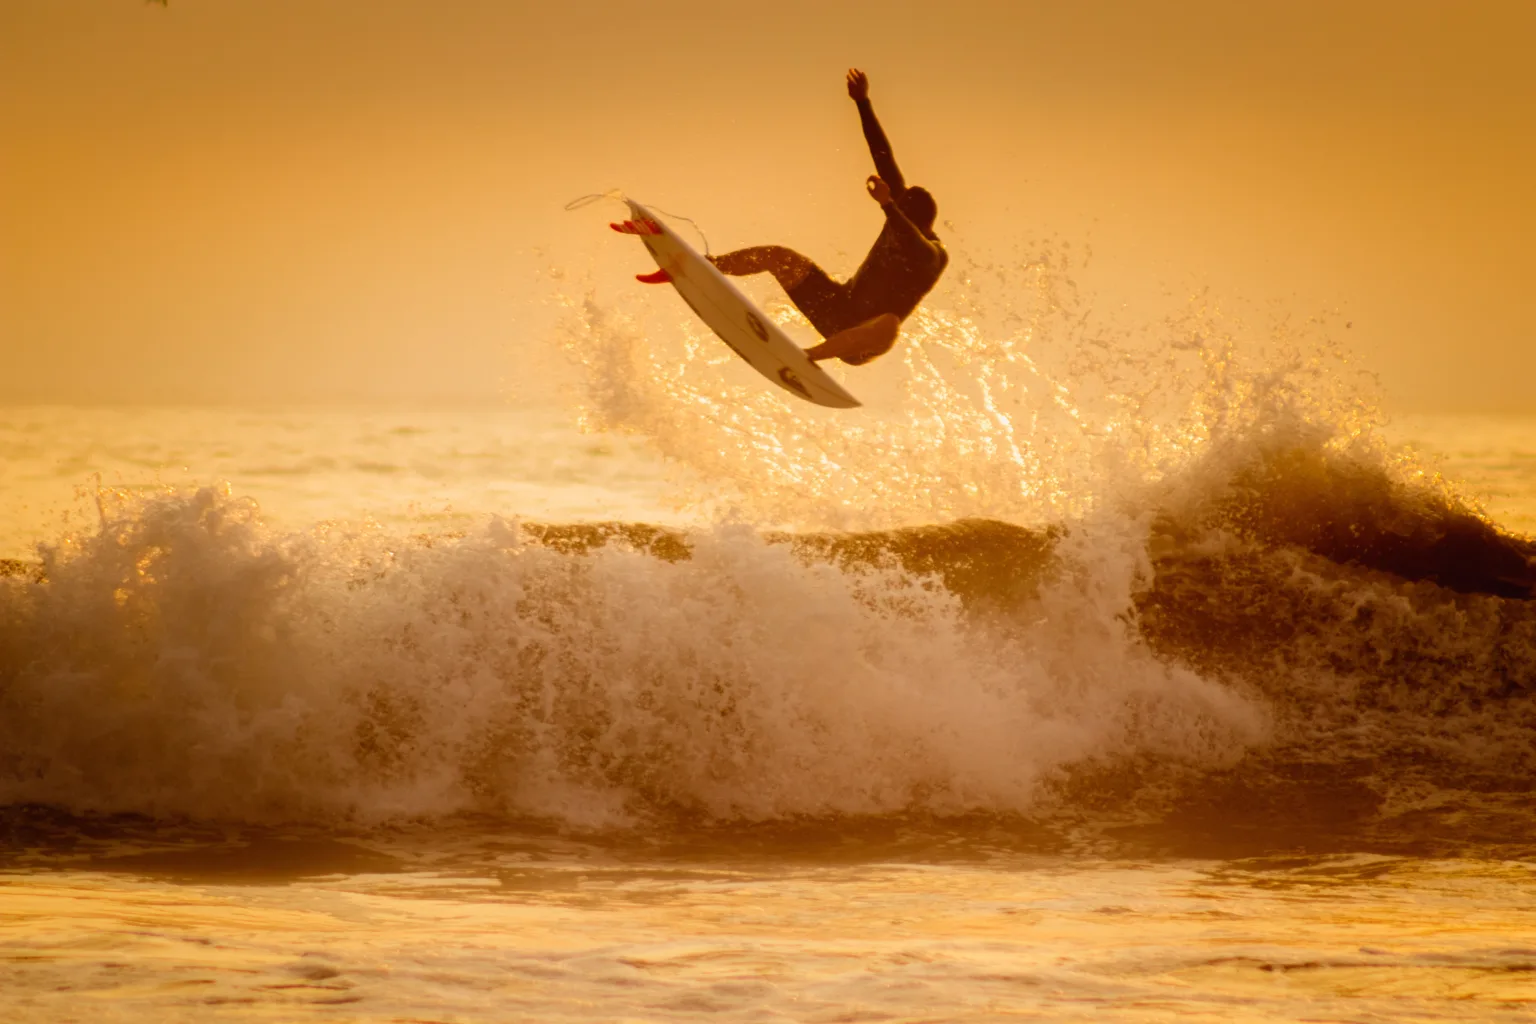 Surfer performing an air in Puerto Viejo